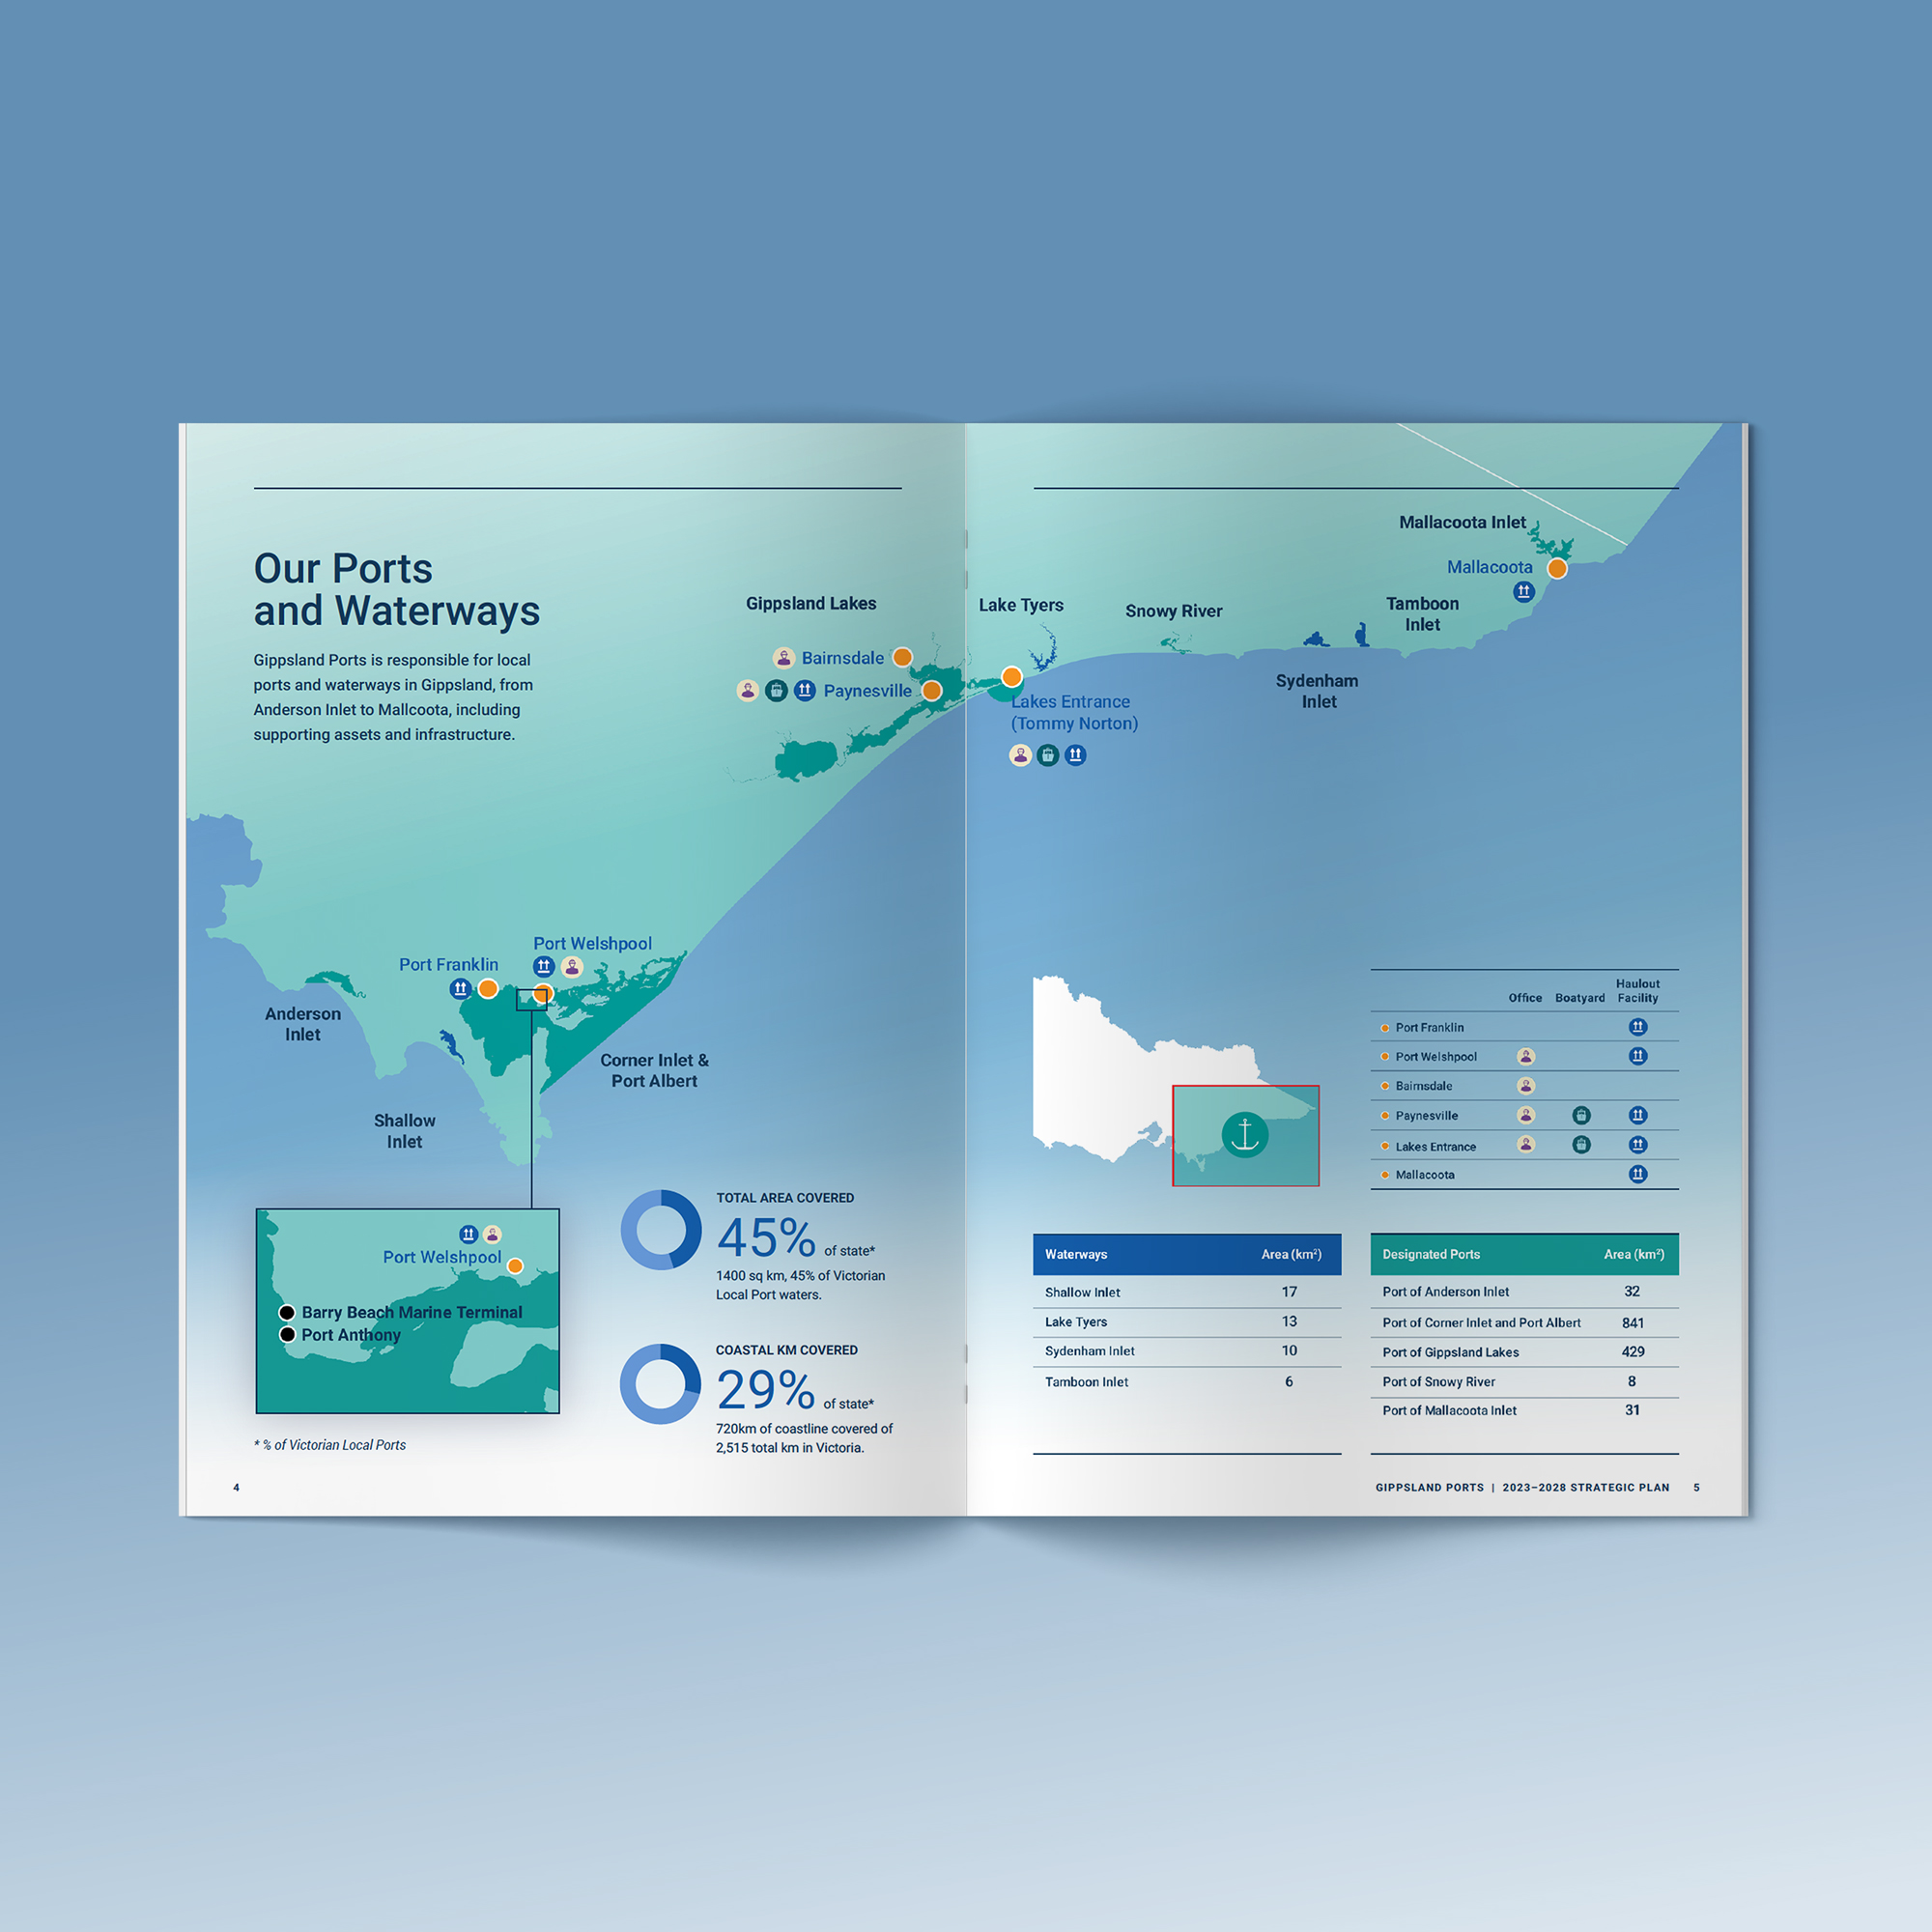 Image features the 'Our Ports and Waterways' spread taken from the Gippsland Ports Strategic Plan 2023-28, which includes a full-colour custom map infographic depicting the waterways and designated ports within the Gippsland Ports area.